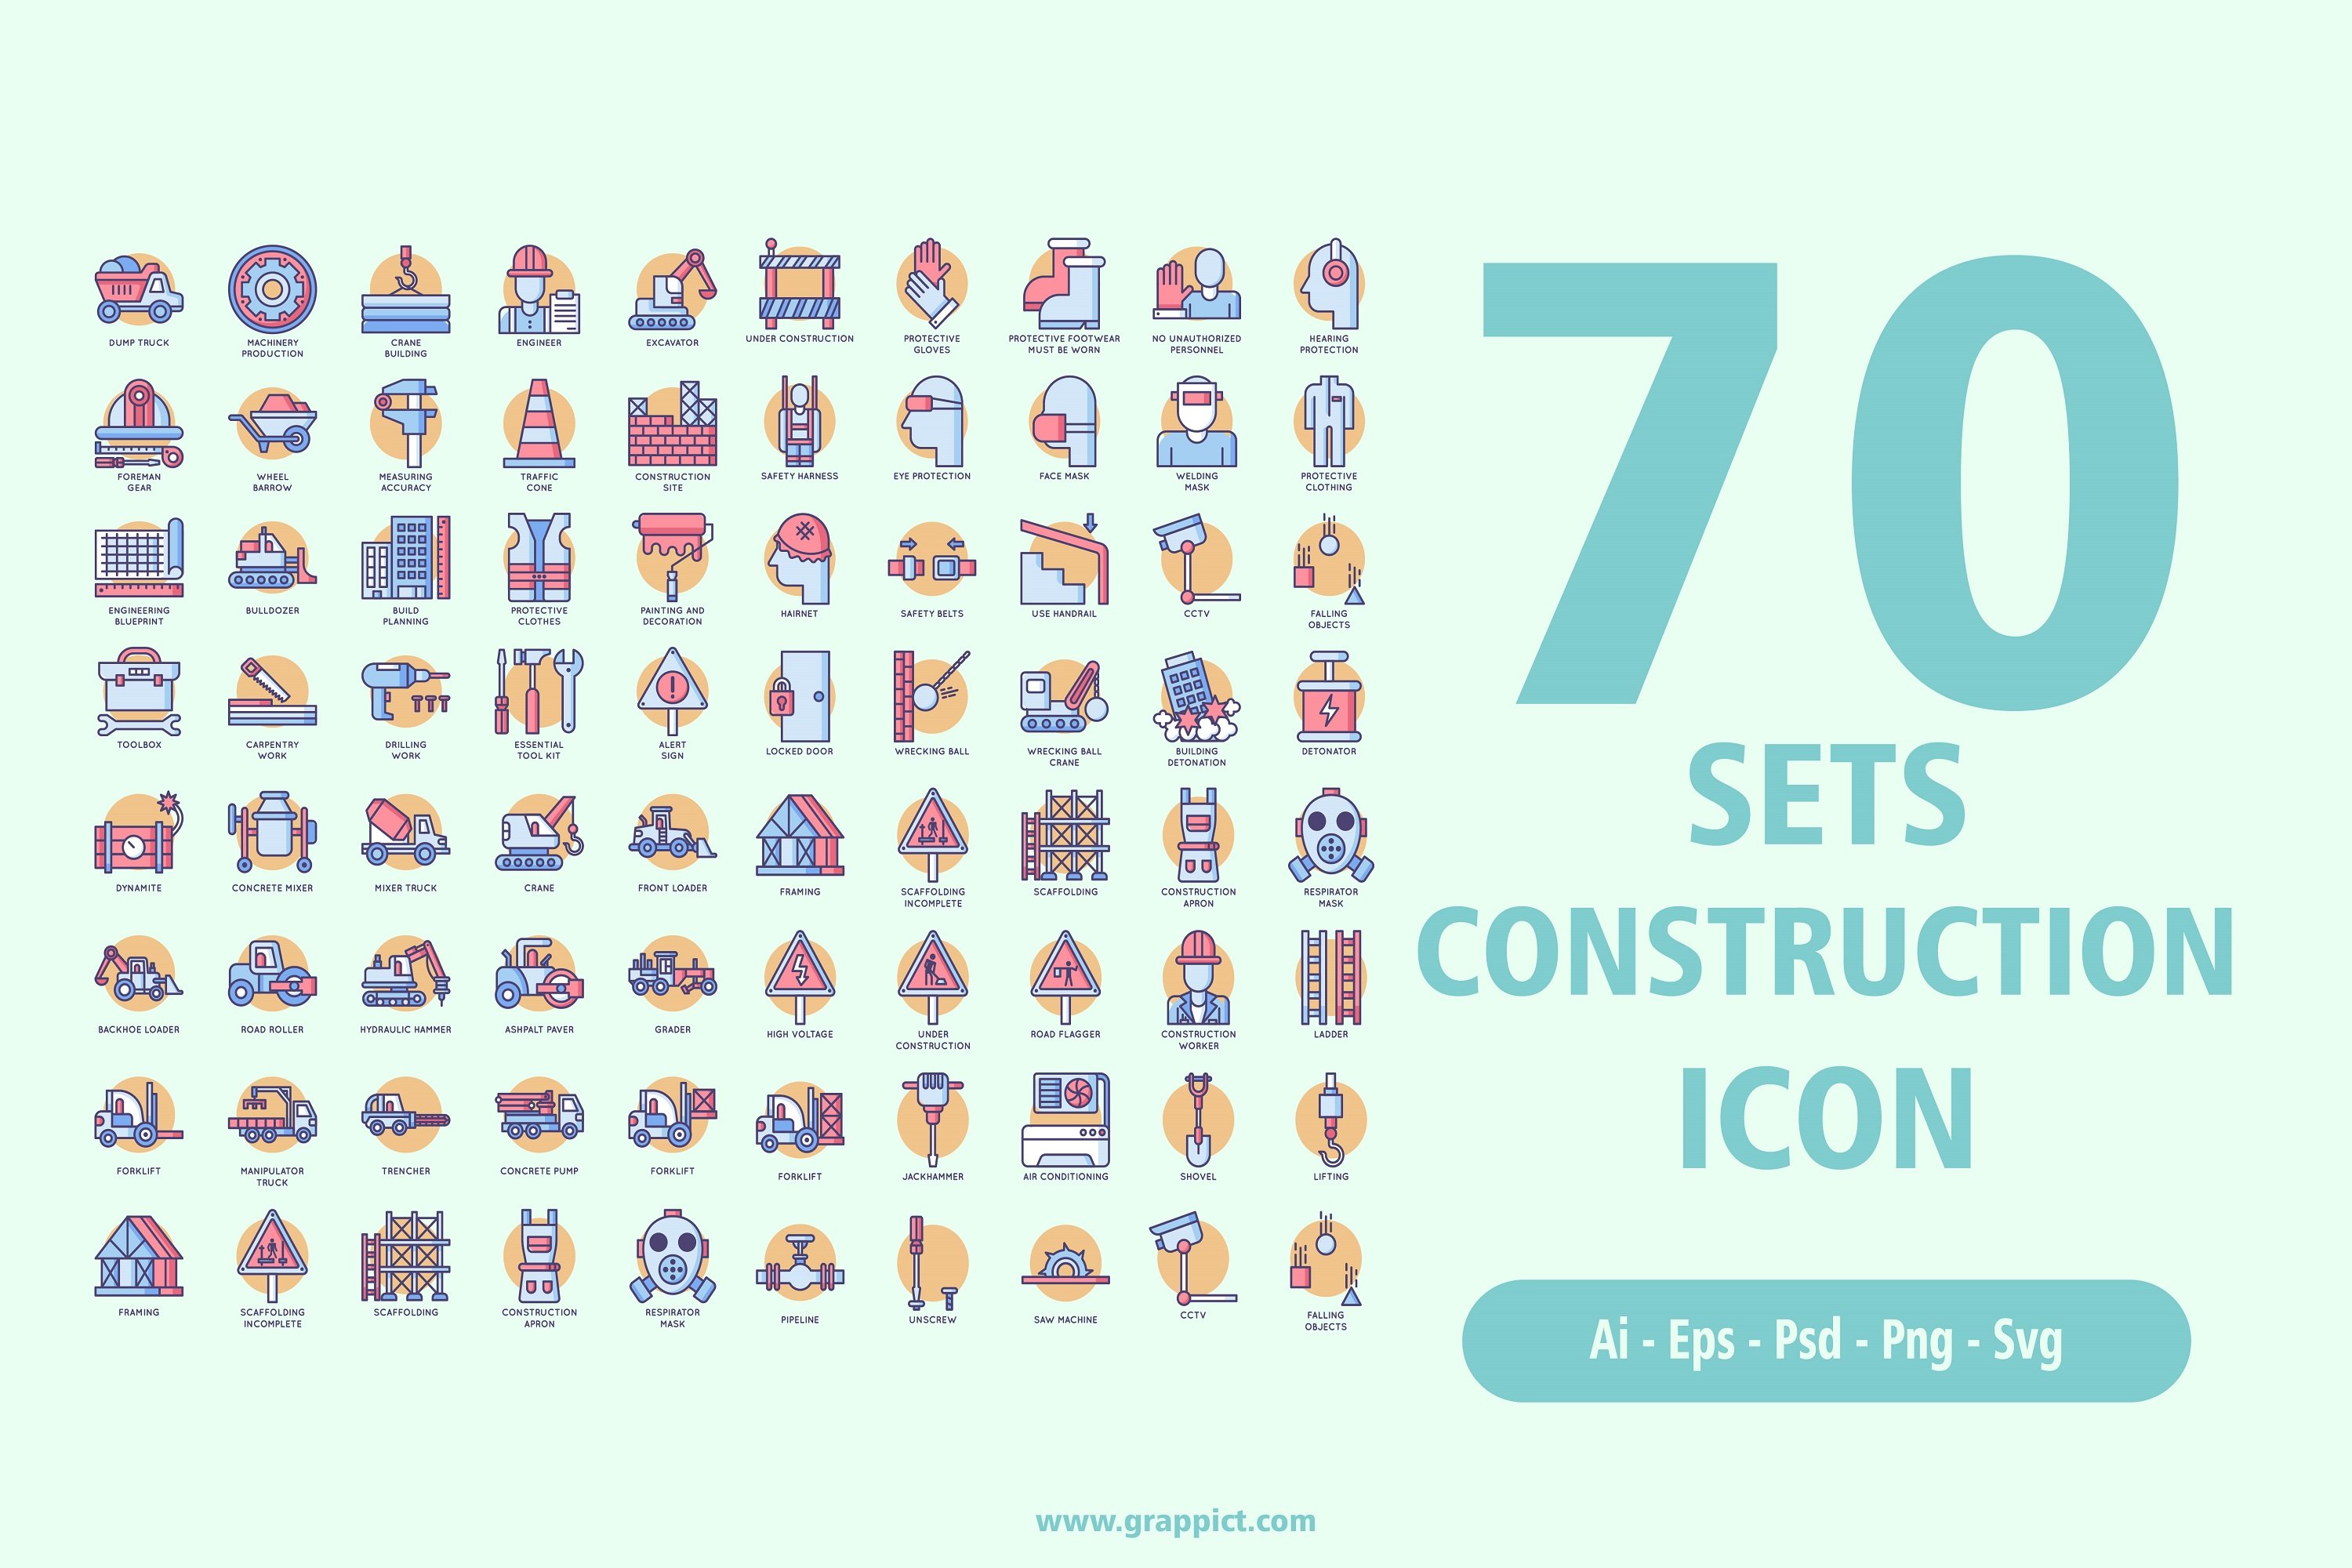 70 Sets Construction Icon cover image.